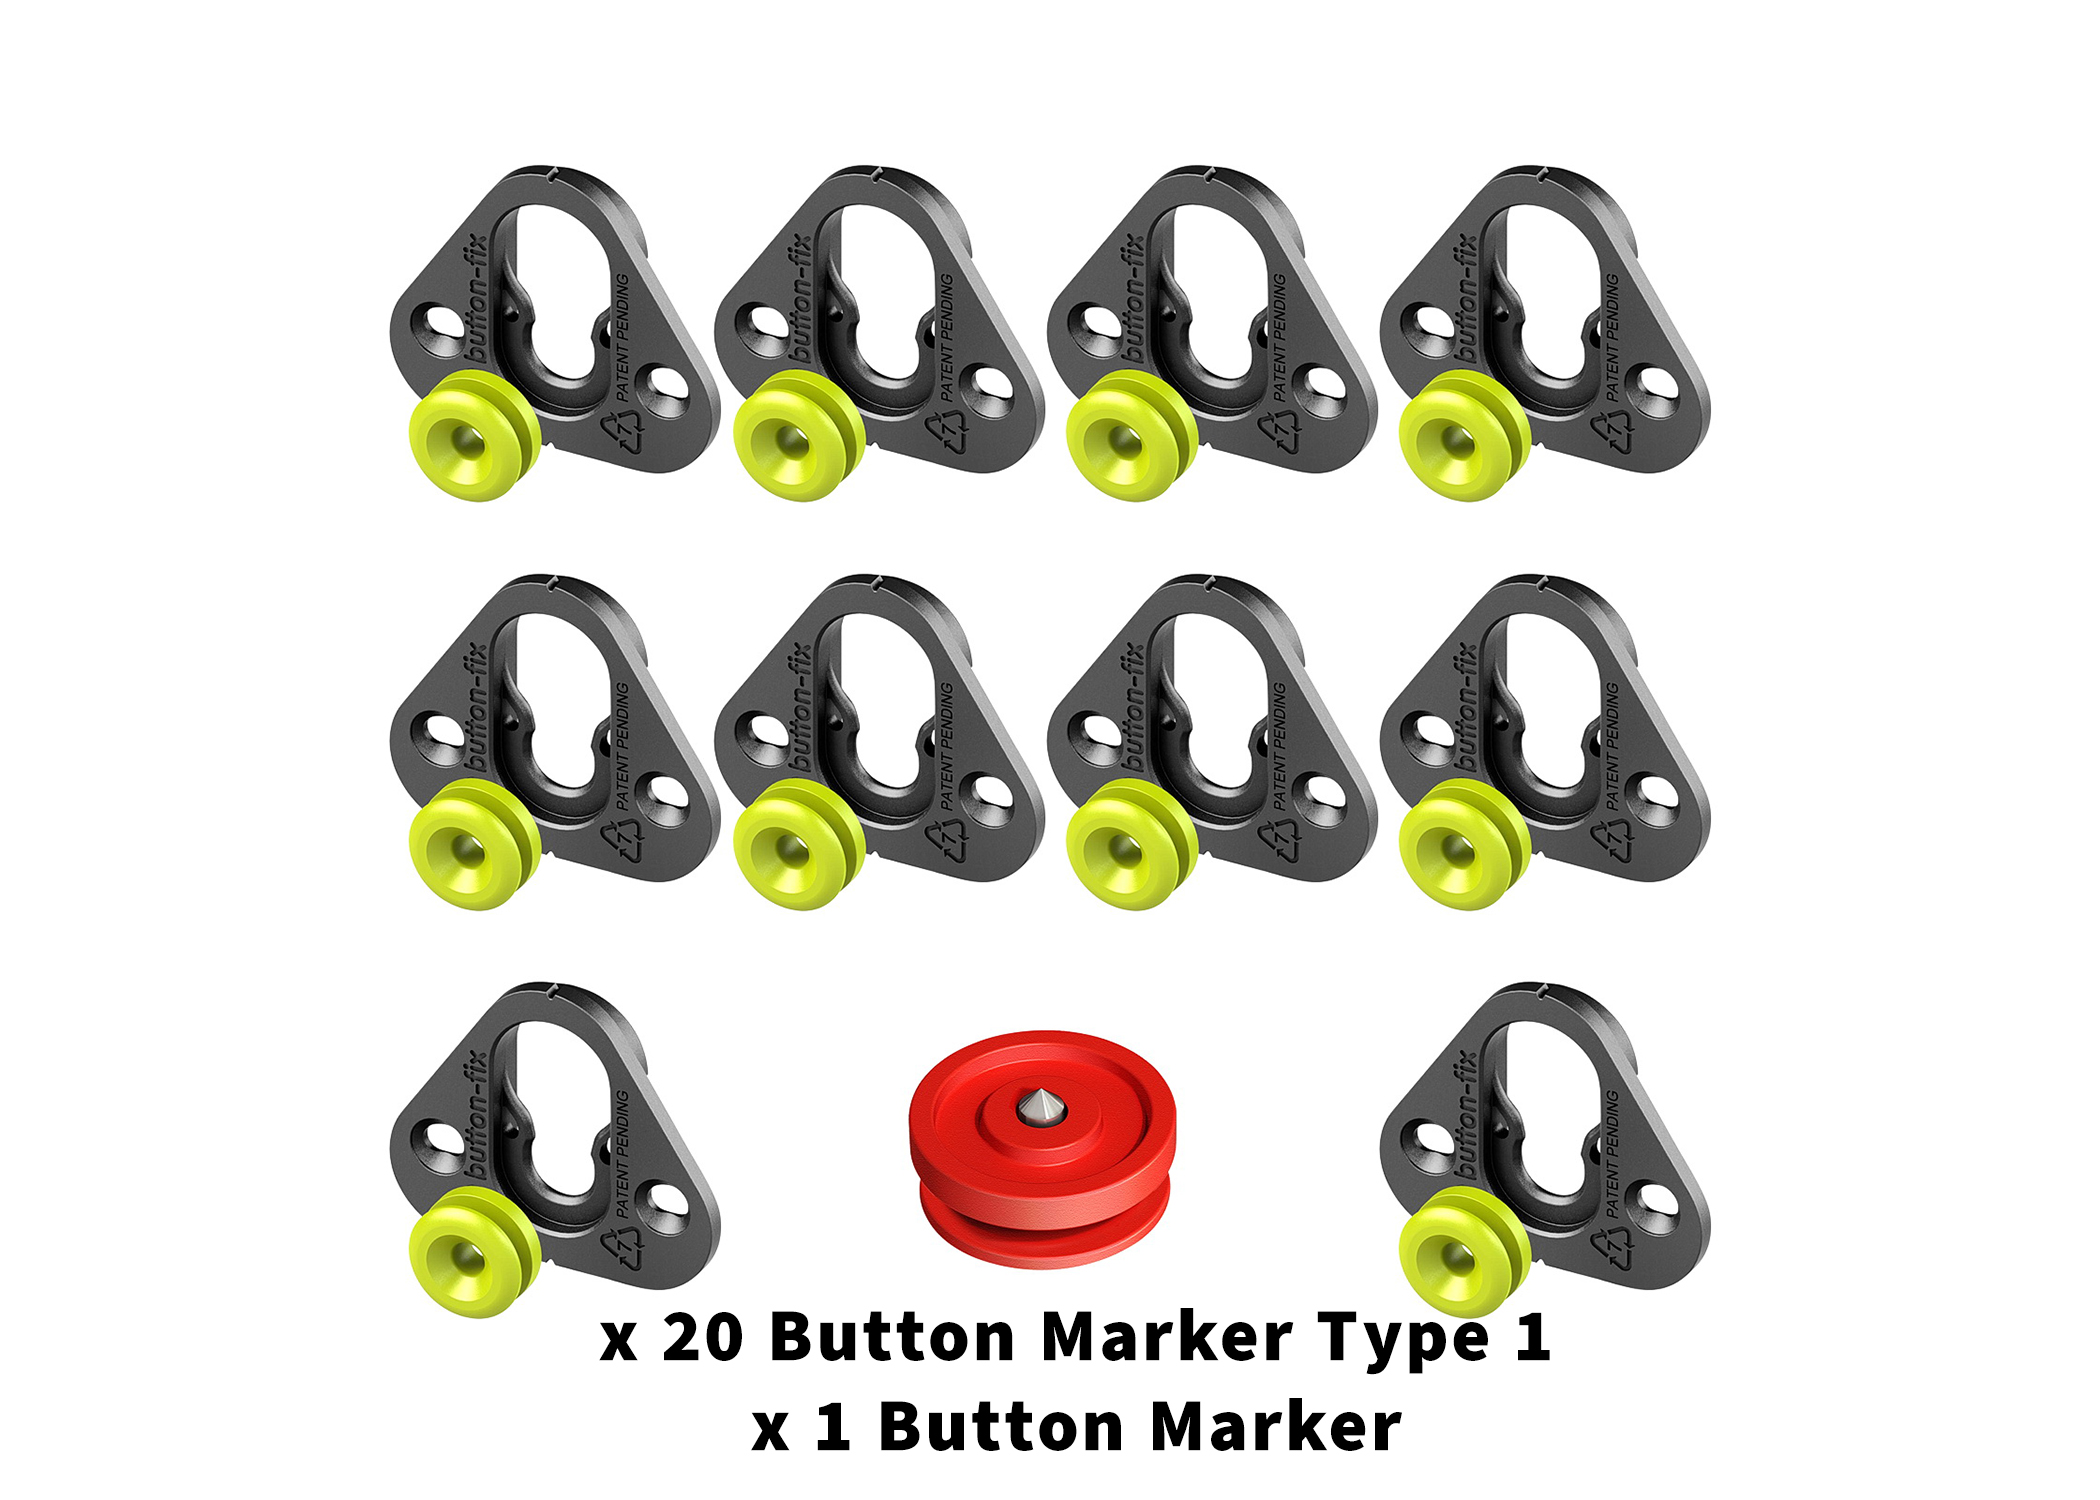 Button Fix Type 1 Bracket Marker Guide Kit Connecting Parallel Panels x20 + 1 Marker Tool